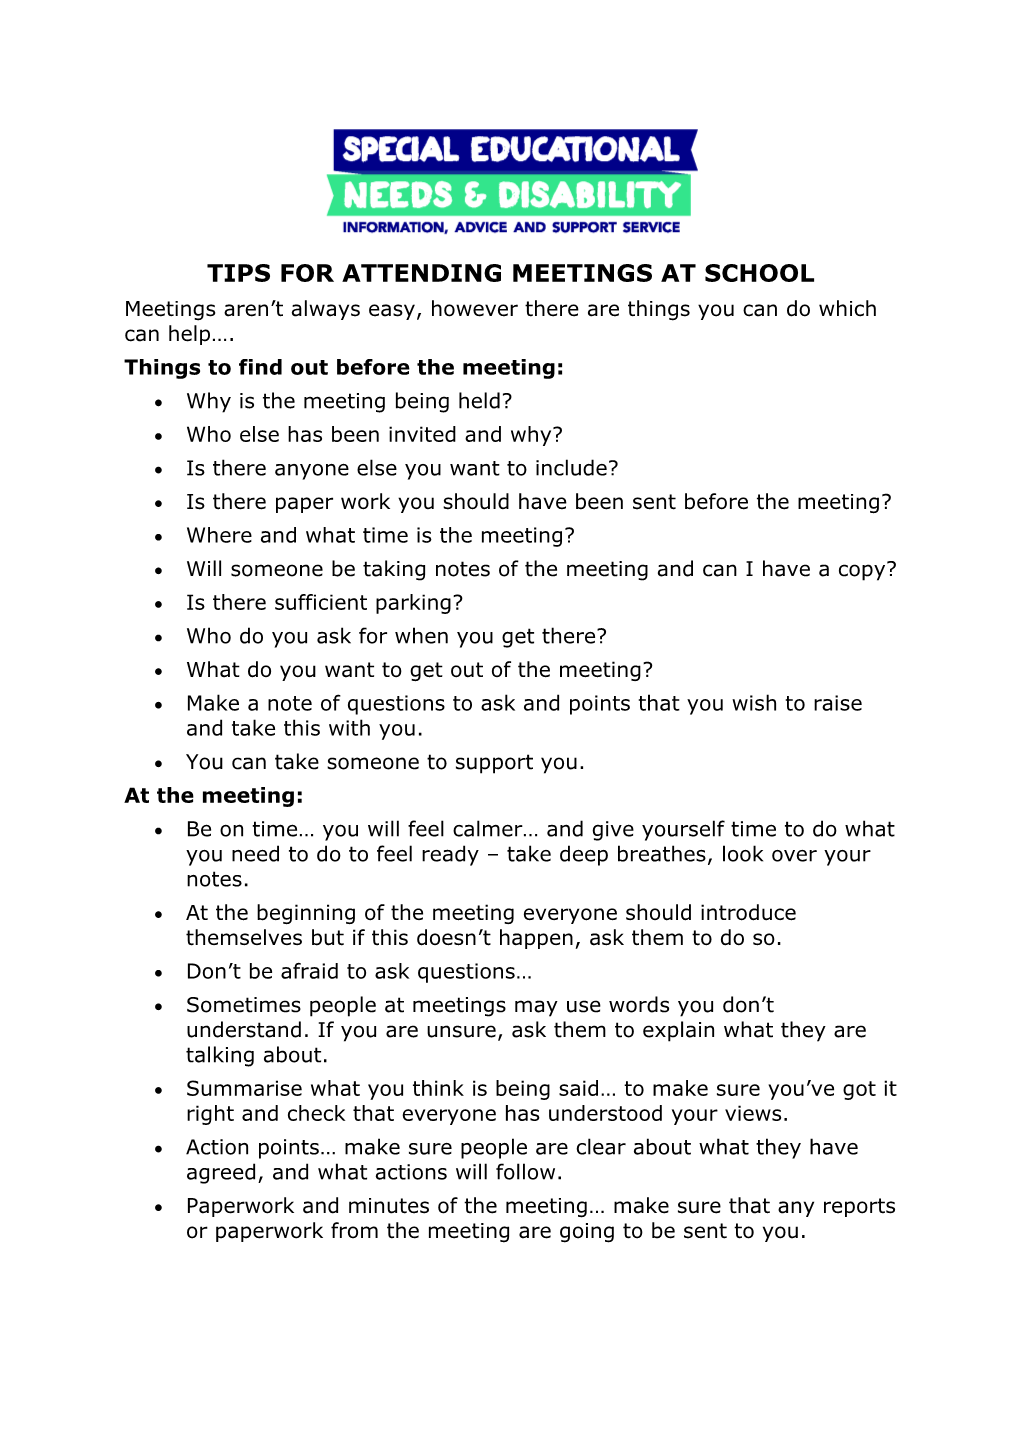 Tips for Attending Meetings at School